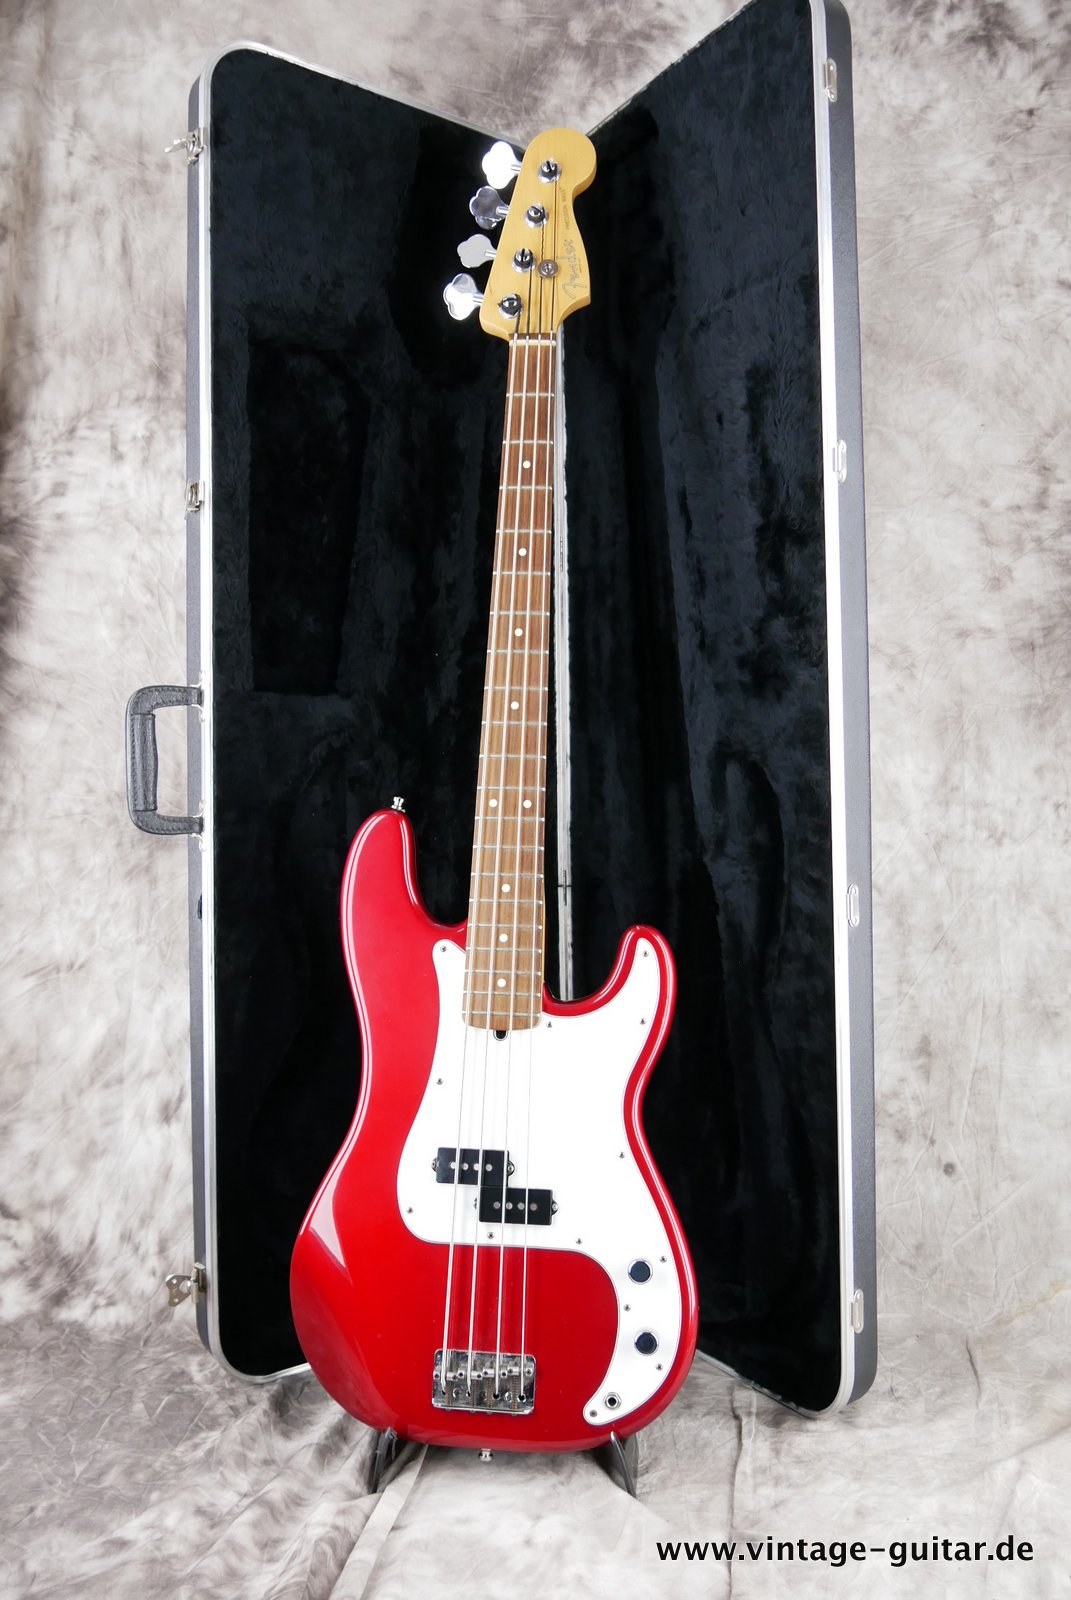 Fender-Precision-Bass-1994-candy-apple-red-016.JPG